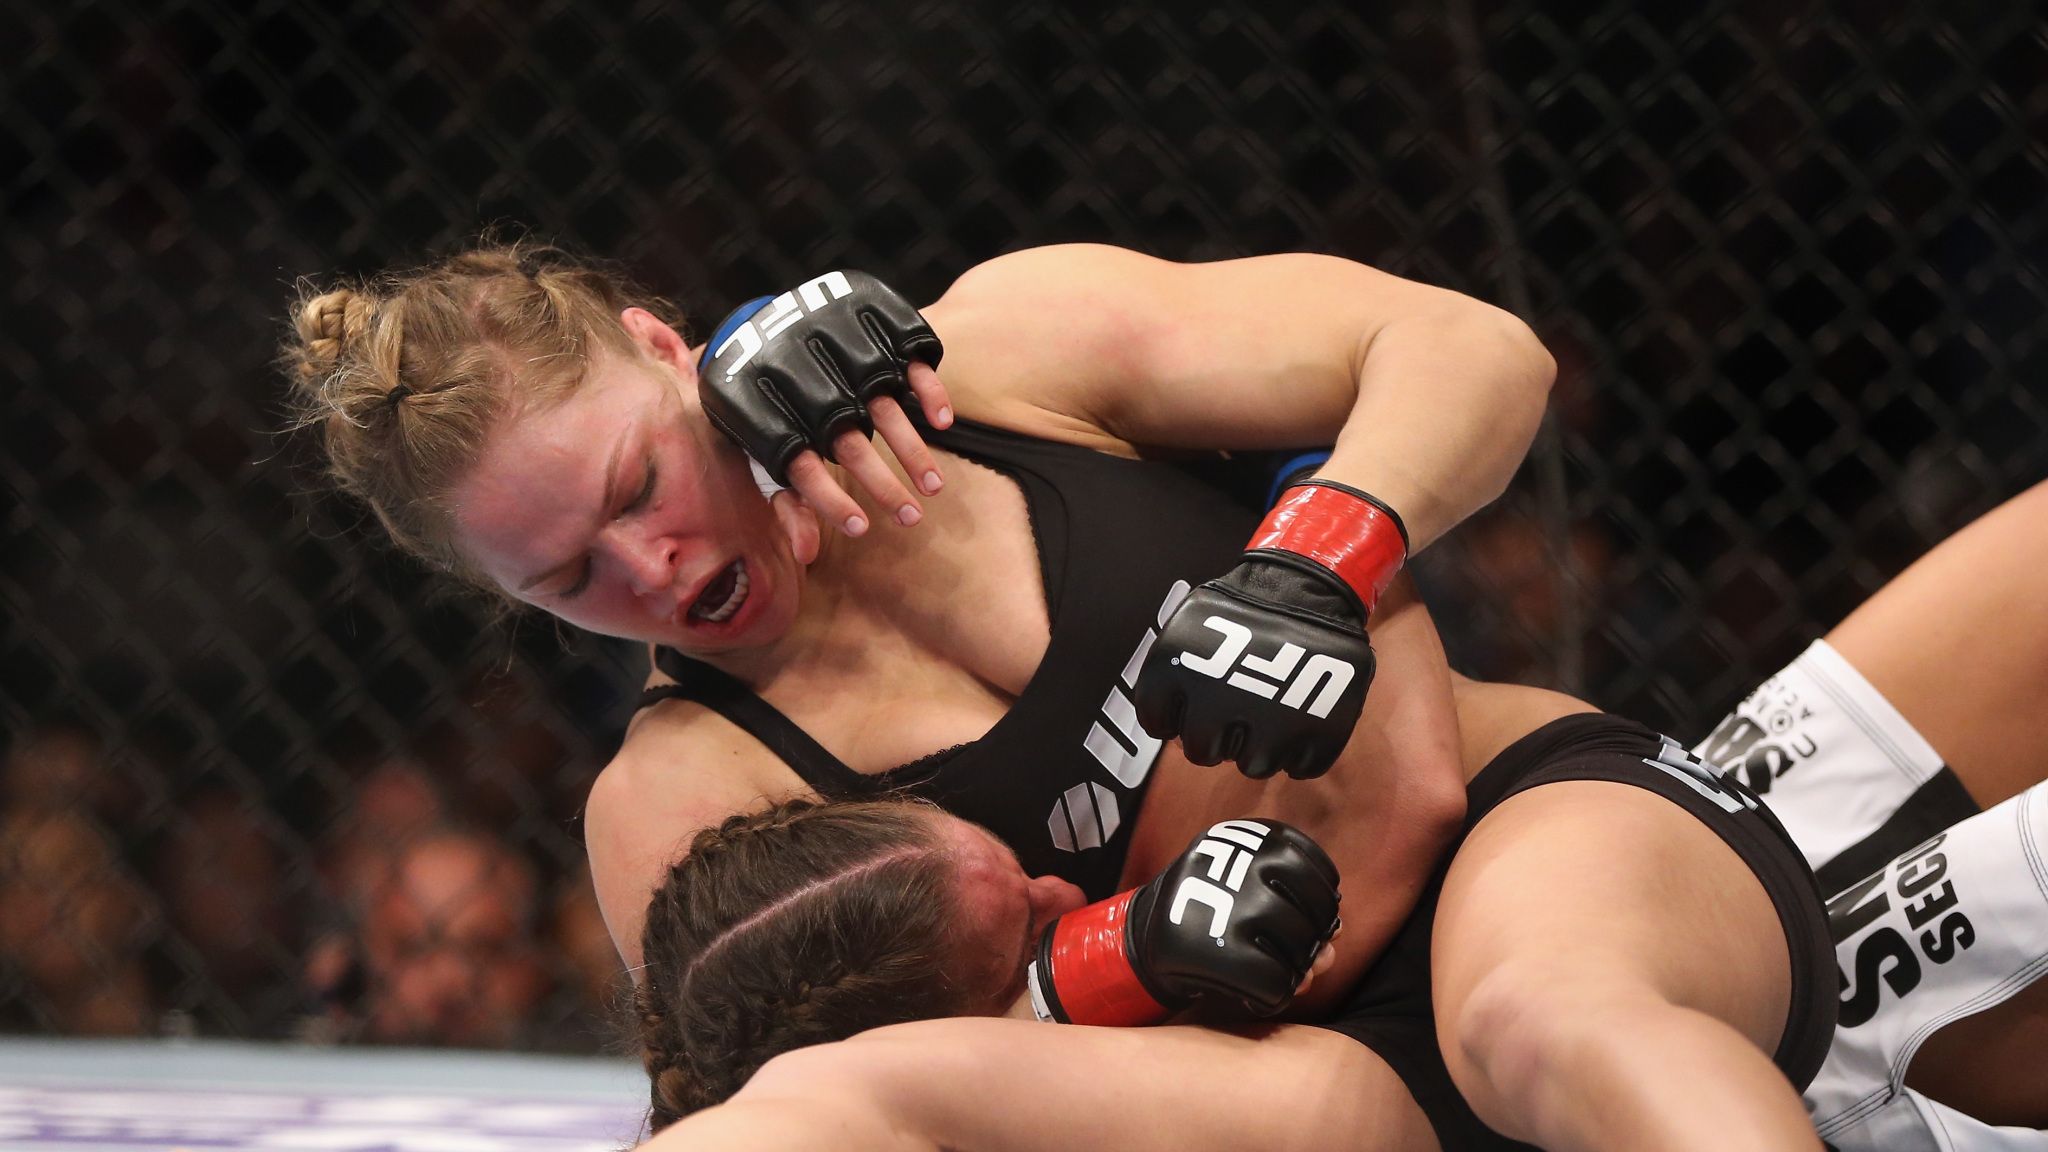 Rousey's judo skills make her an undefeated UFC champion.